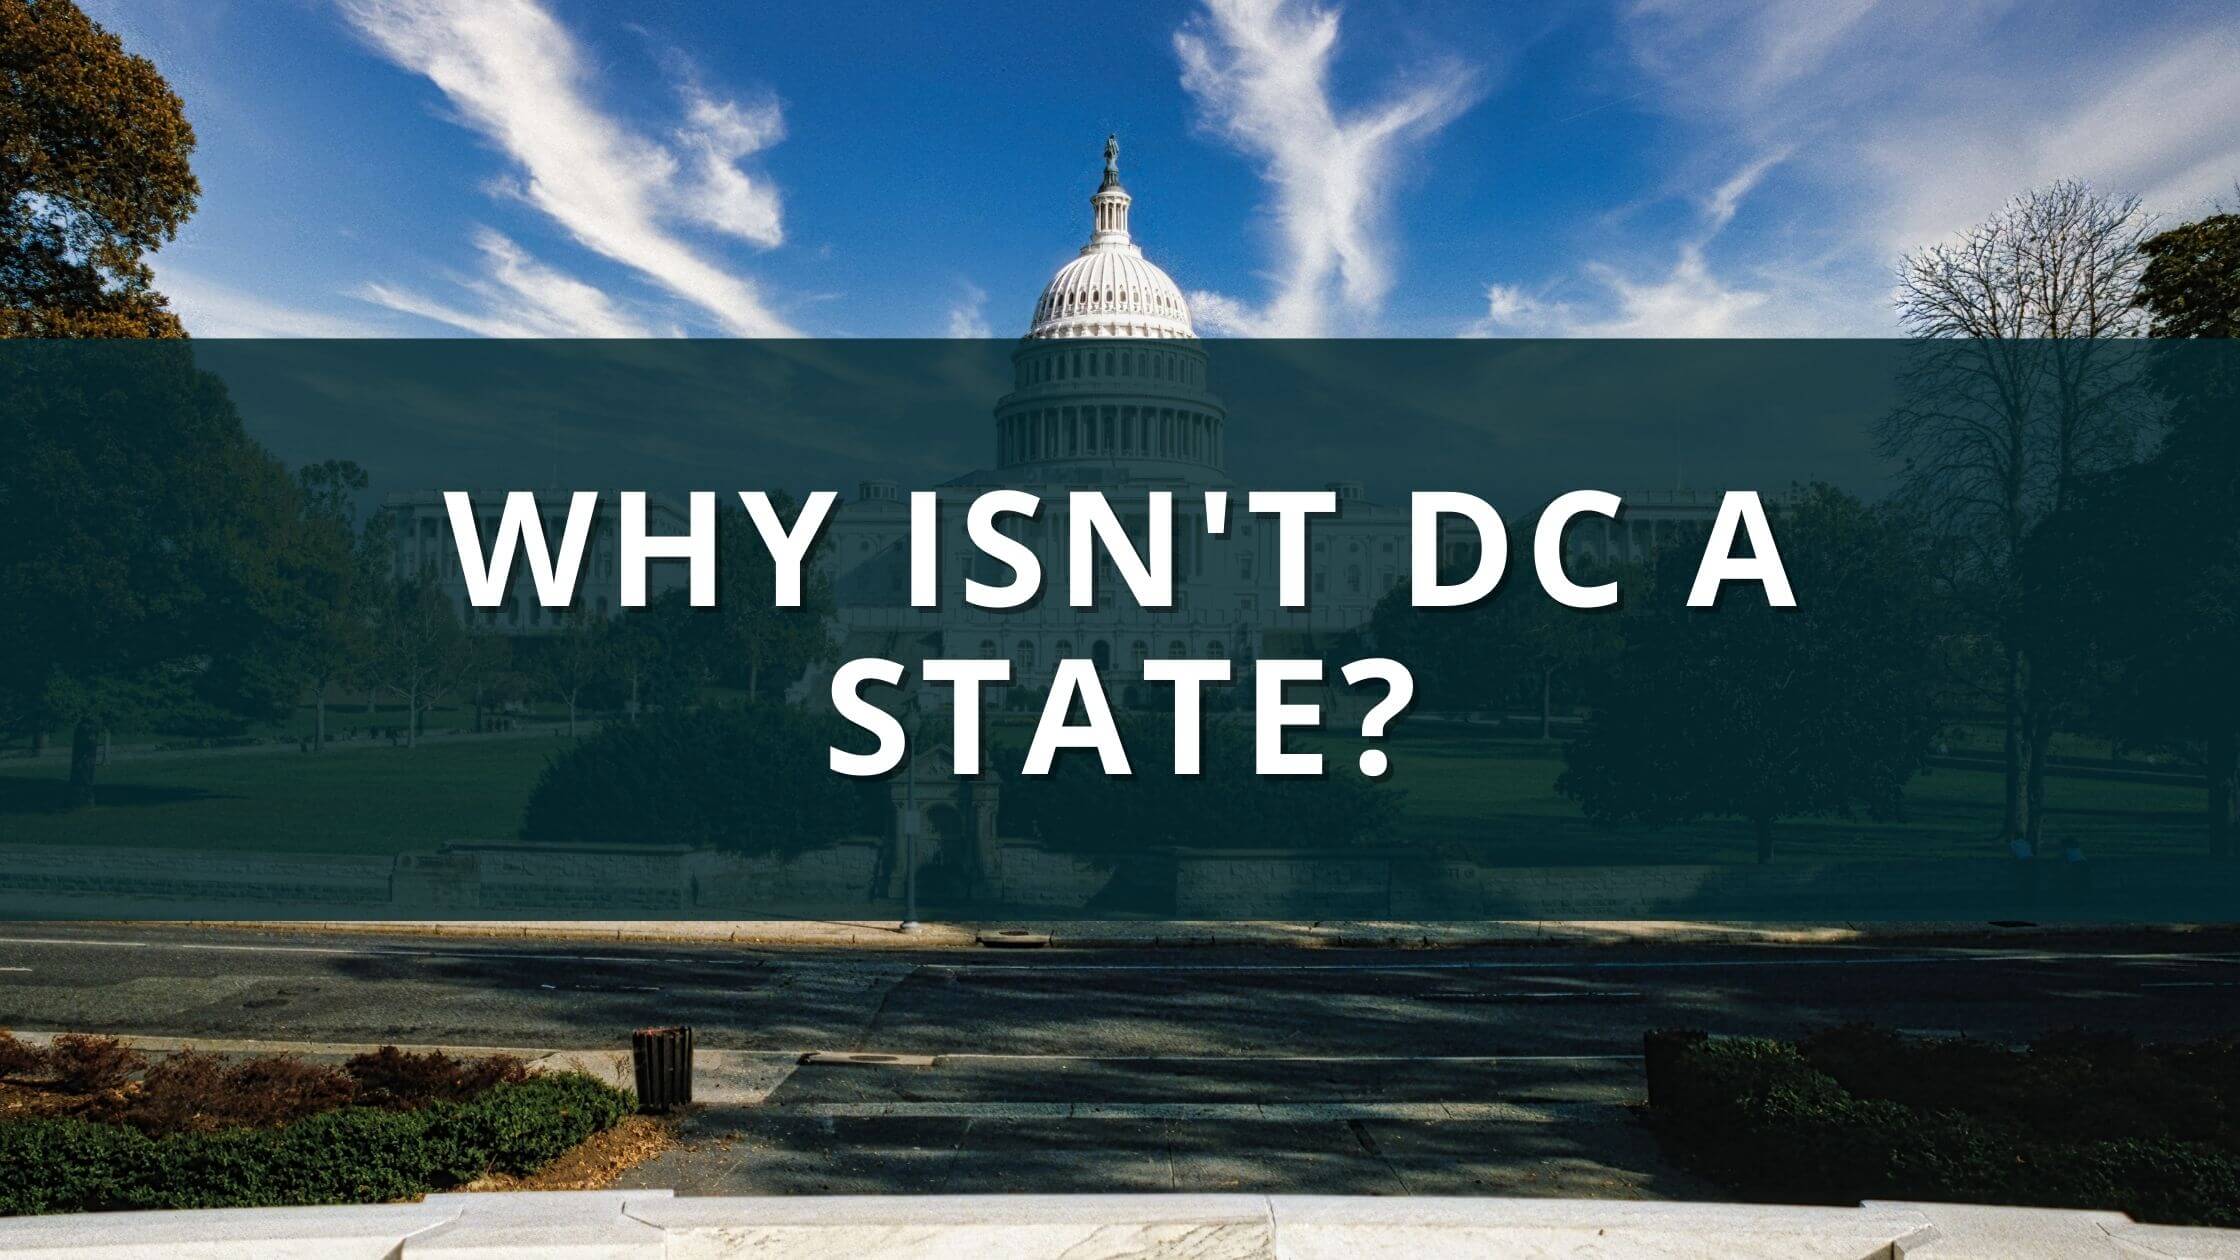 Why is DC not a state?